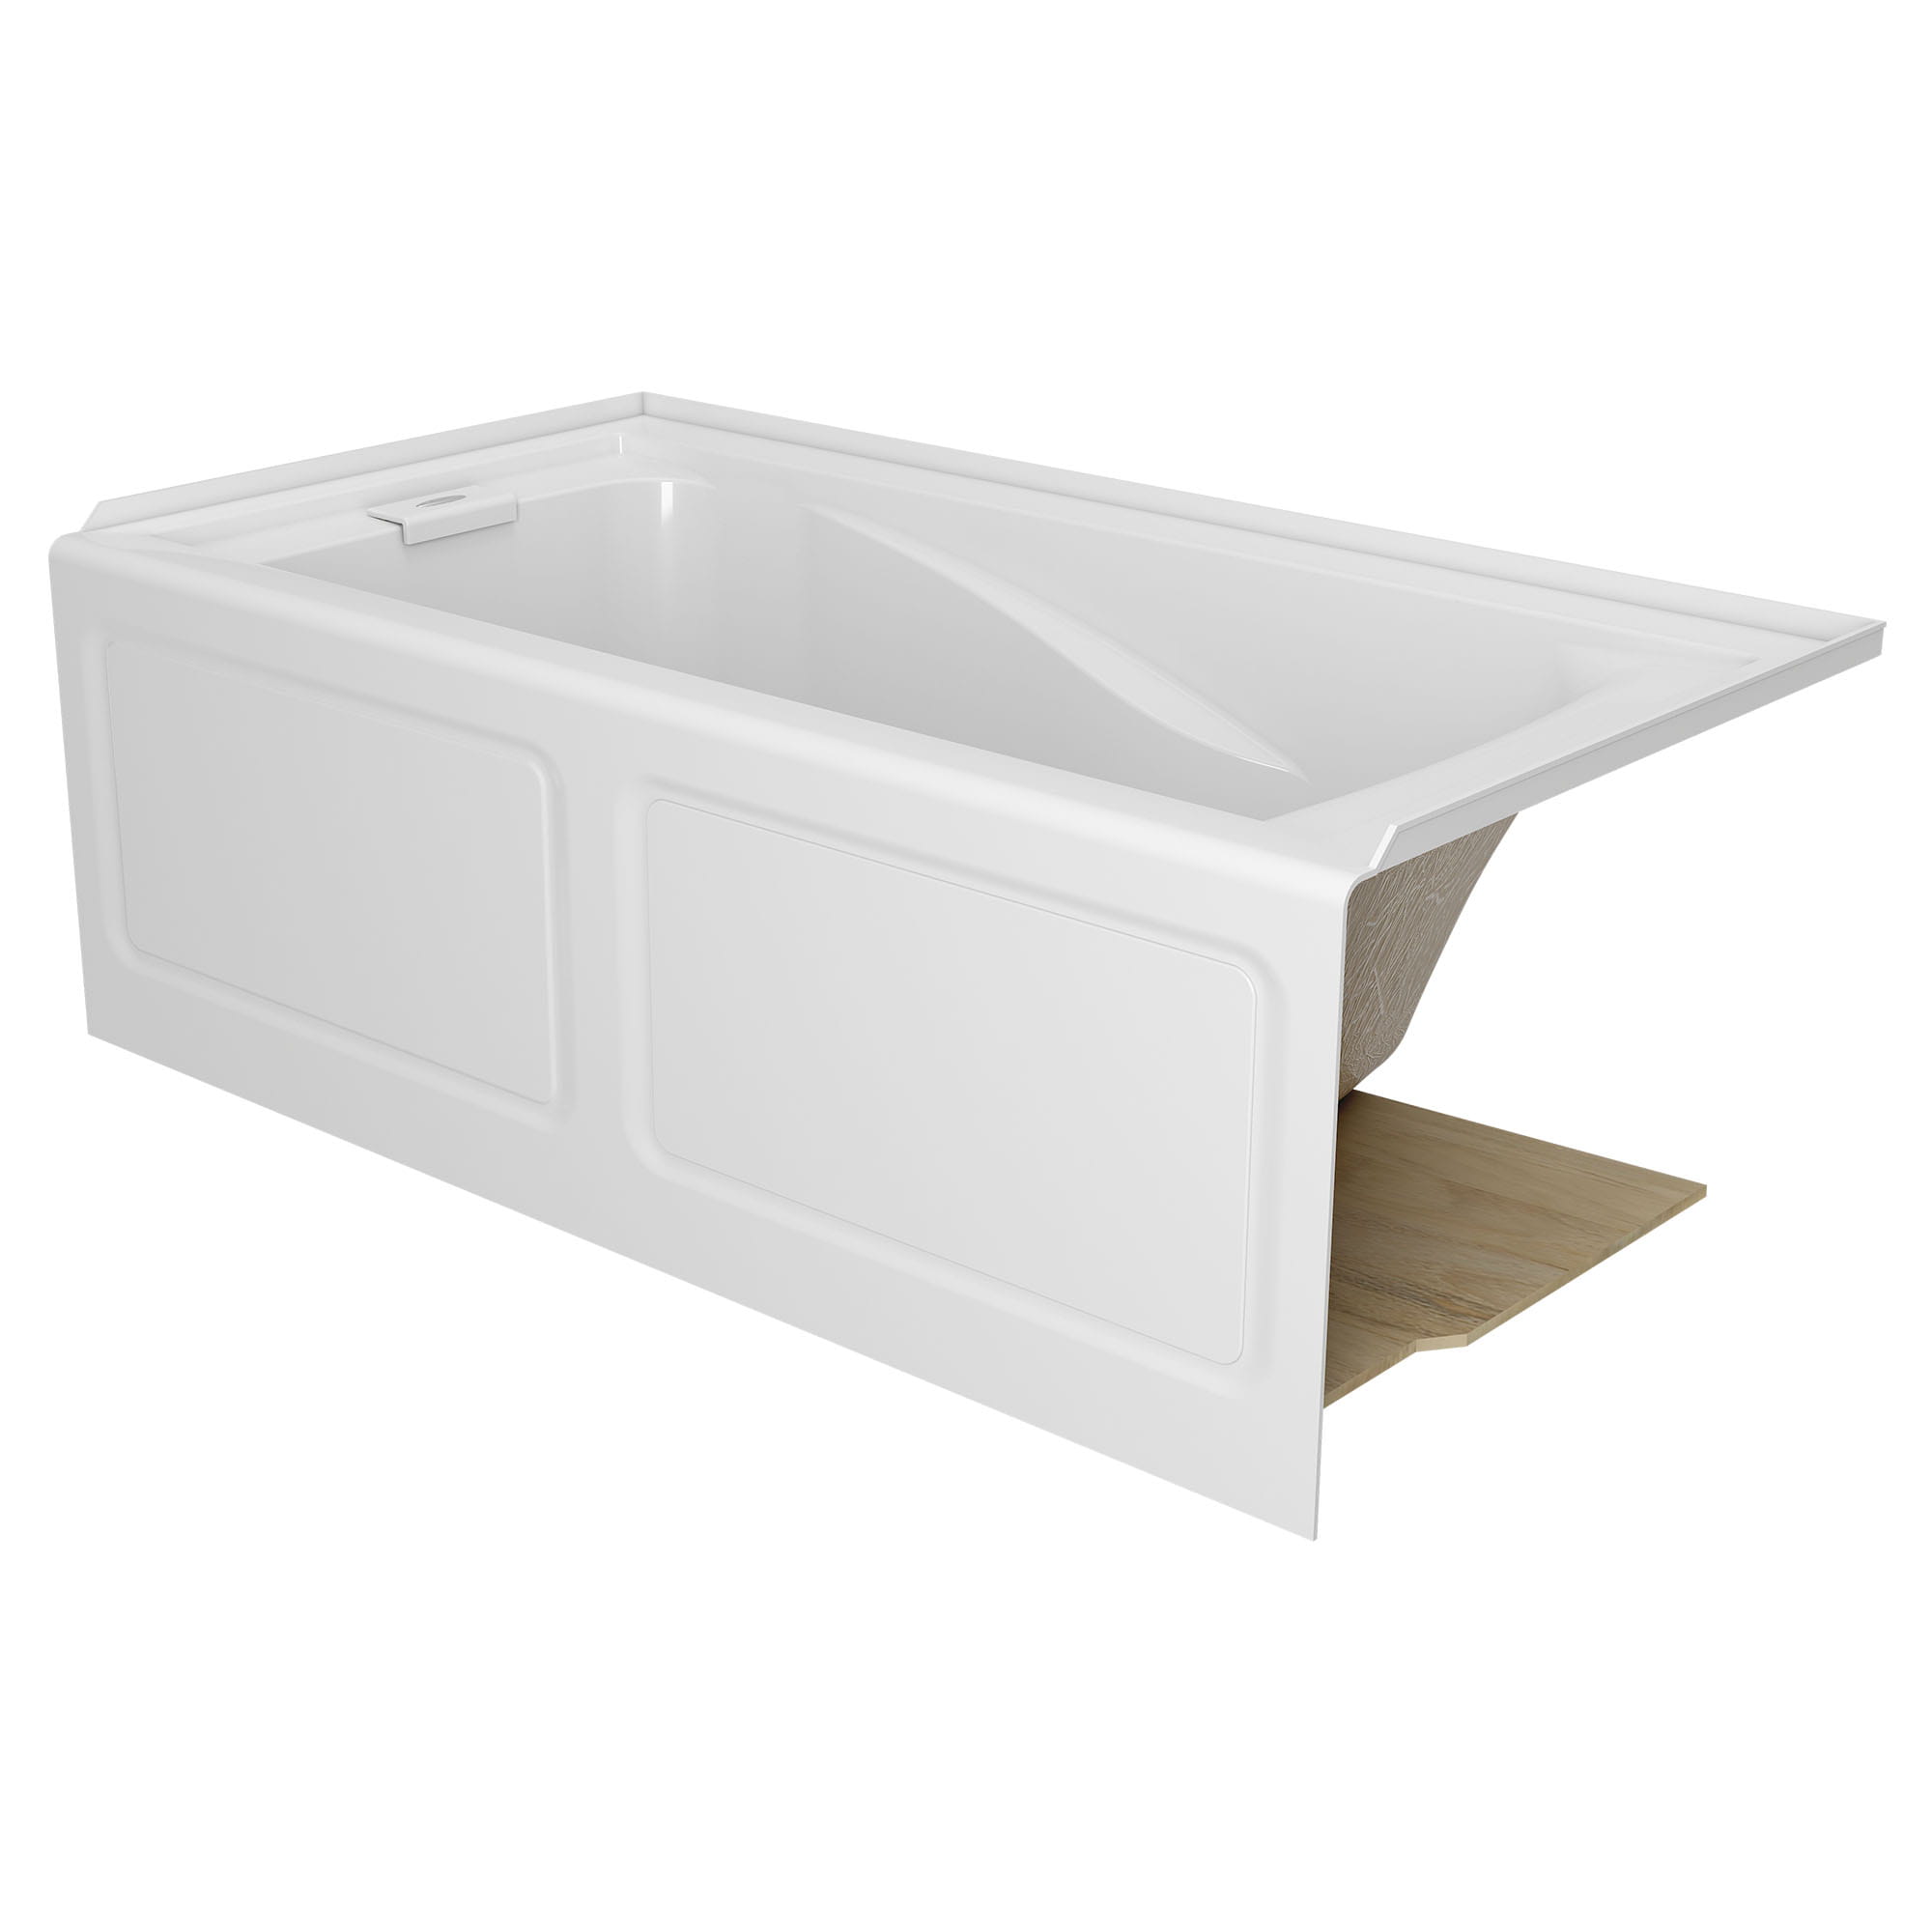 EverClean 60x32 Inch Integral Apron Deep Soak Bathtub with Left Hand Outlet WHITE